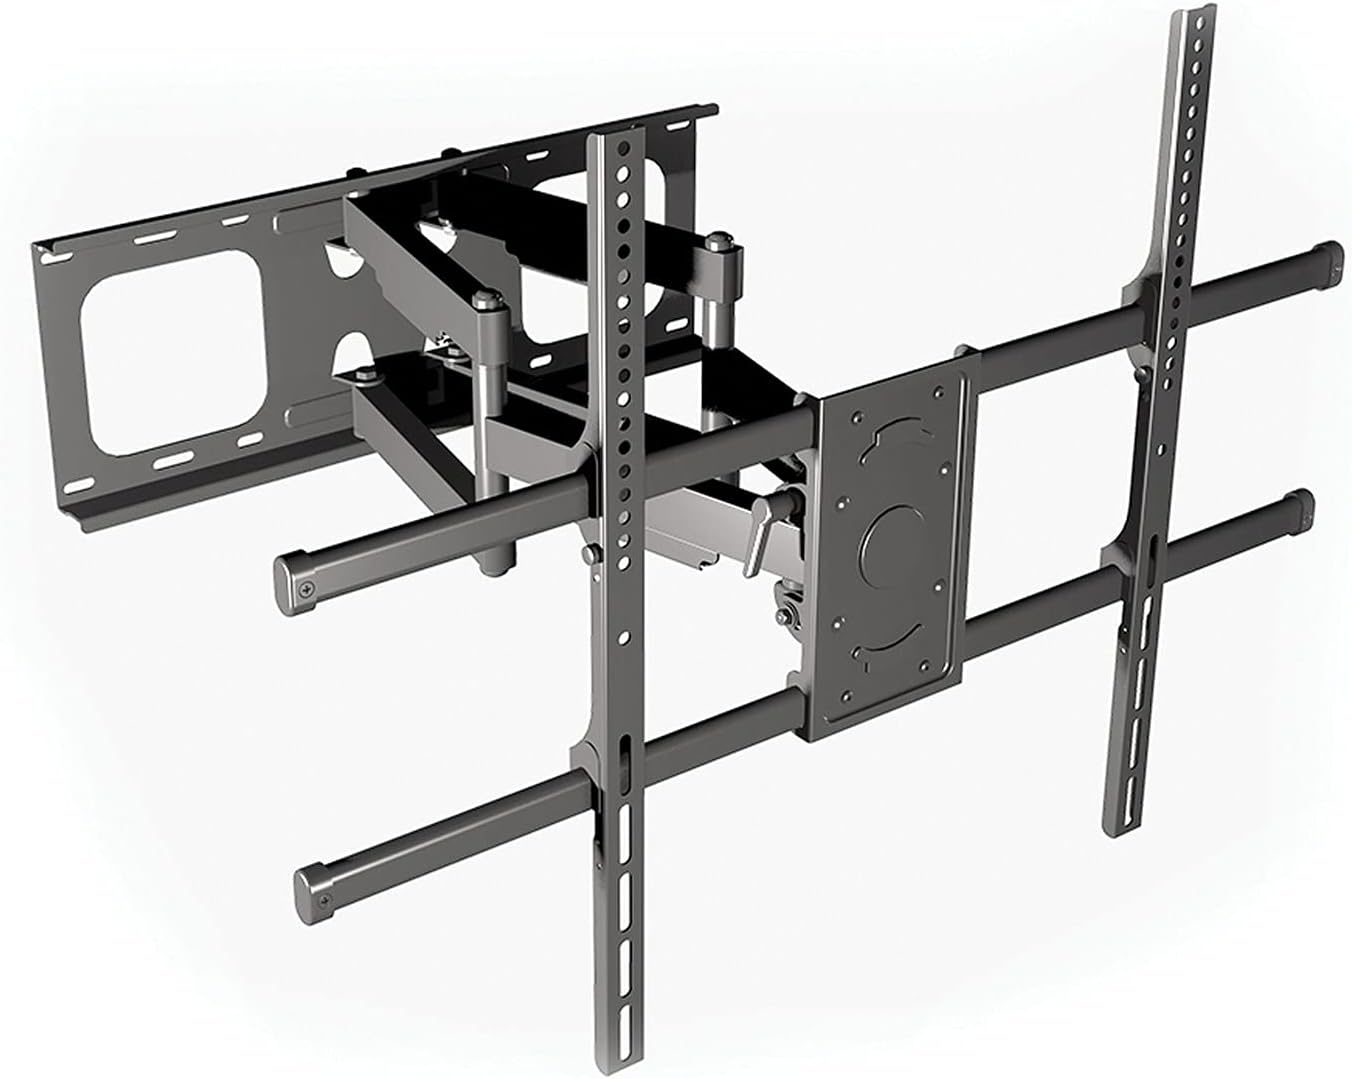 Next Level by Promounts NLA-86P 50-Inch to 100-Inch Articulating Wall Mount